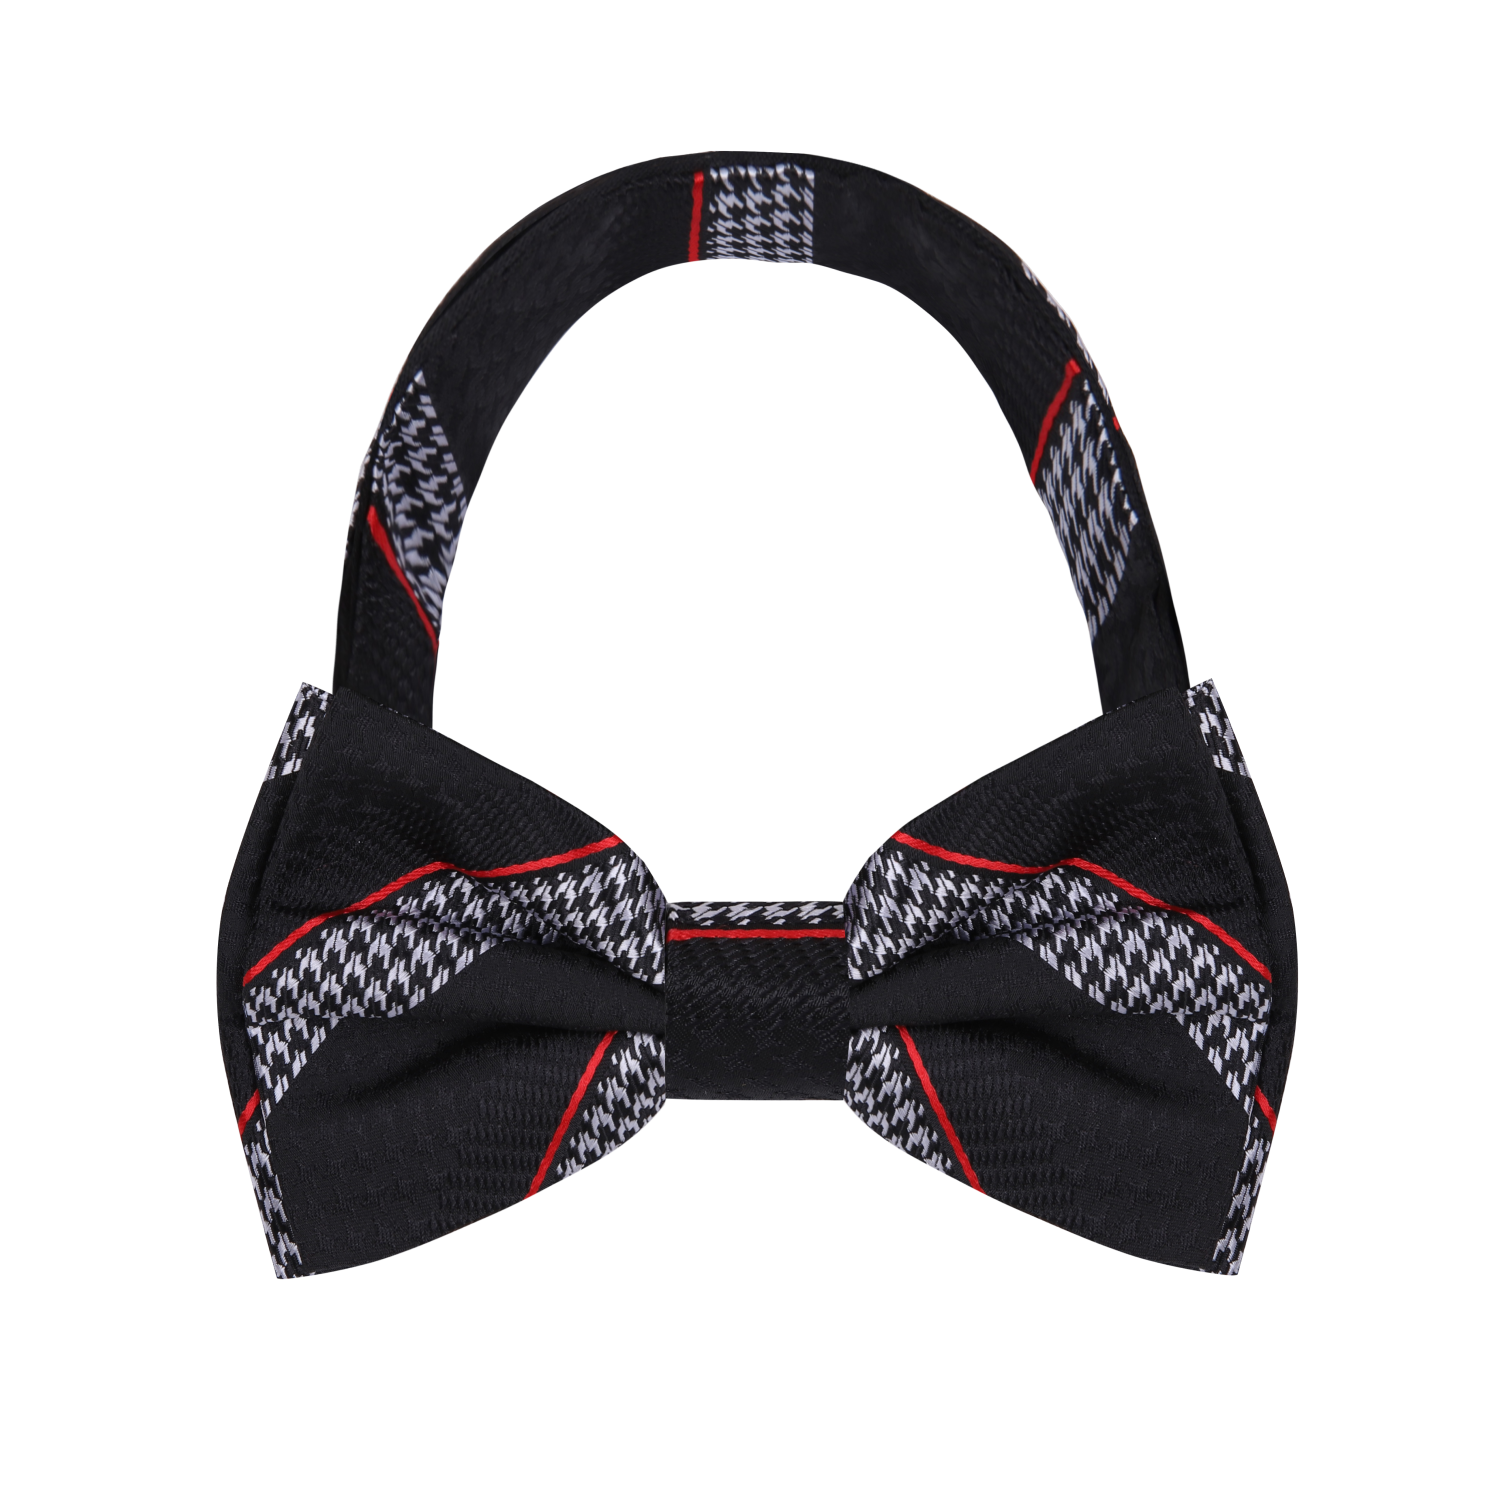 Pre Tied A Black, Red, Grey Houndstooth and Stripe Pattern Bow Tie